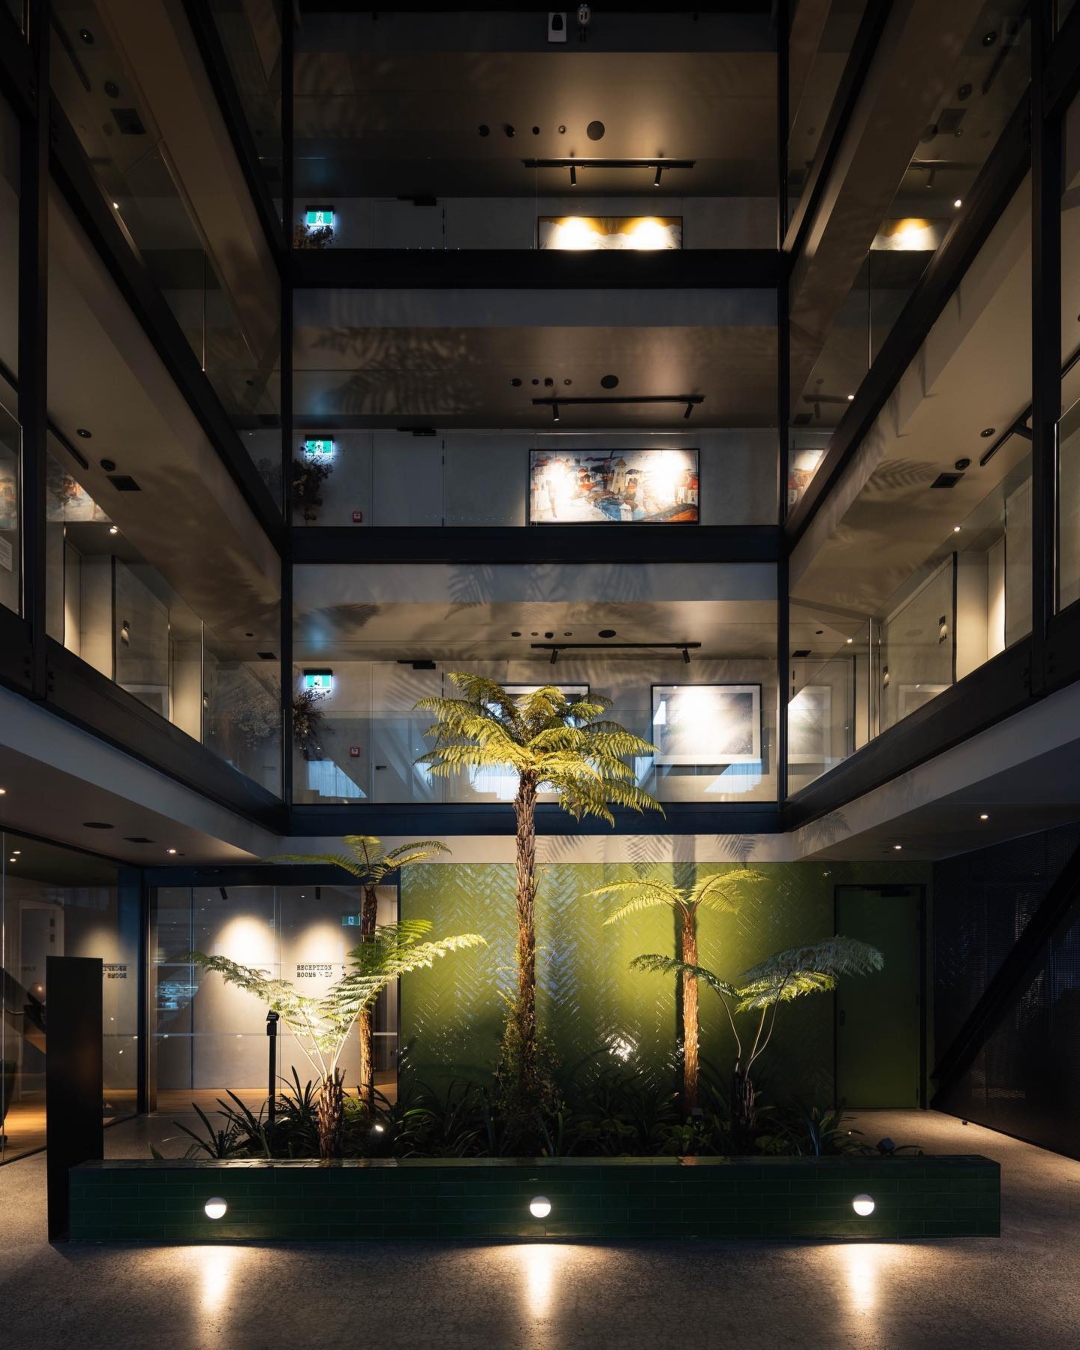 A dimly lit hotel atrium with ferns on the ground floor and artwork displays visible on the 3 floors above it.